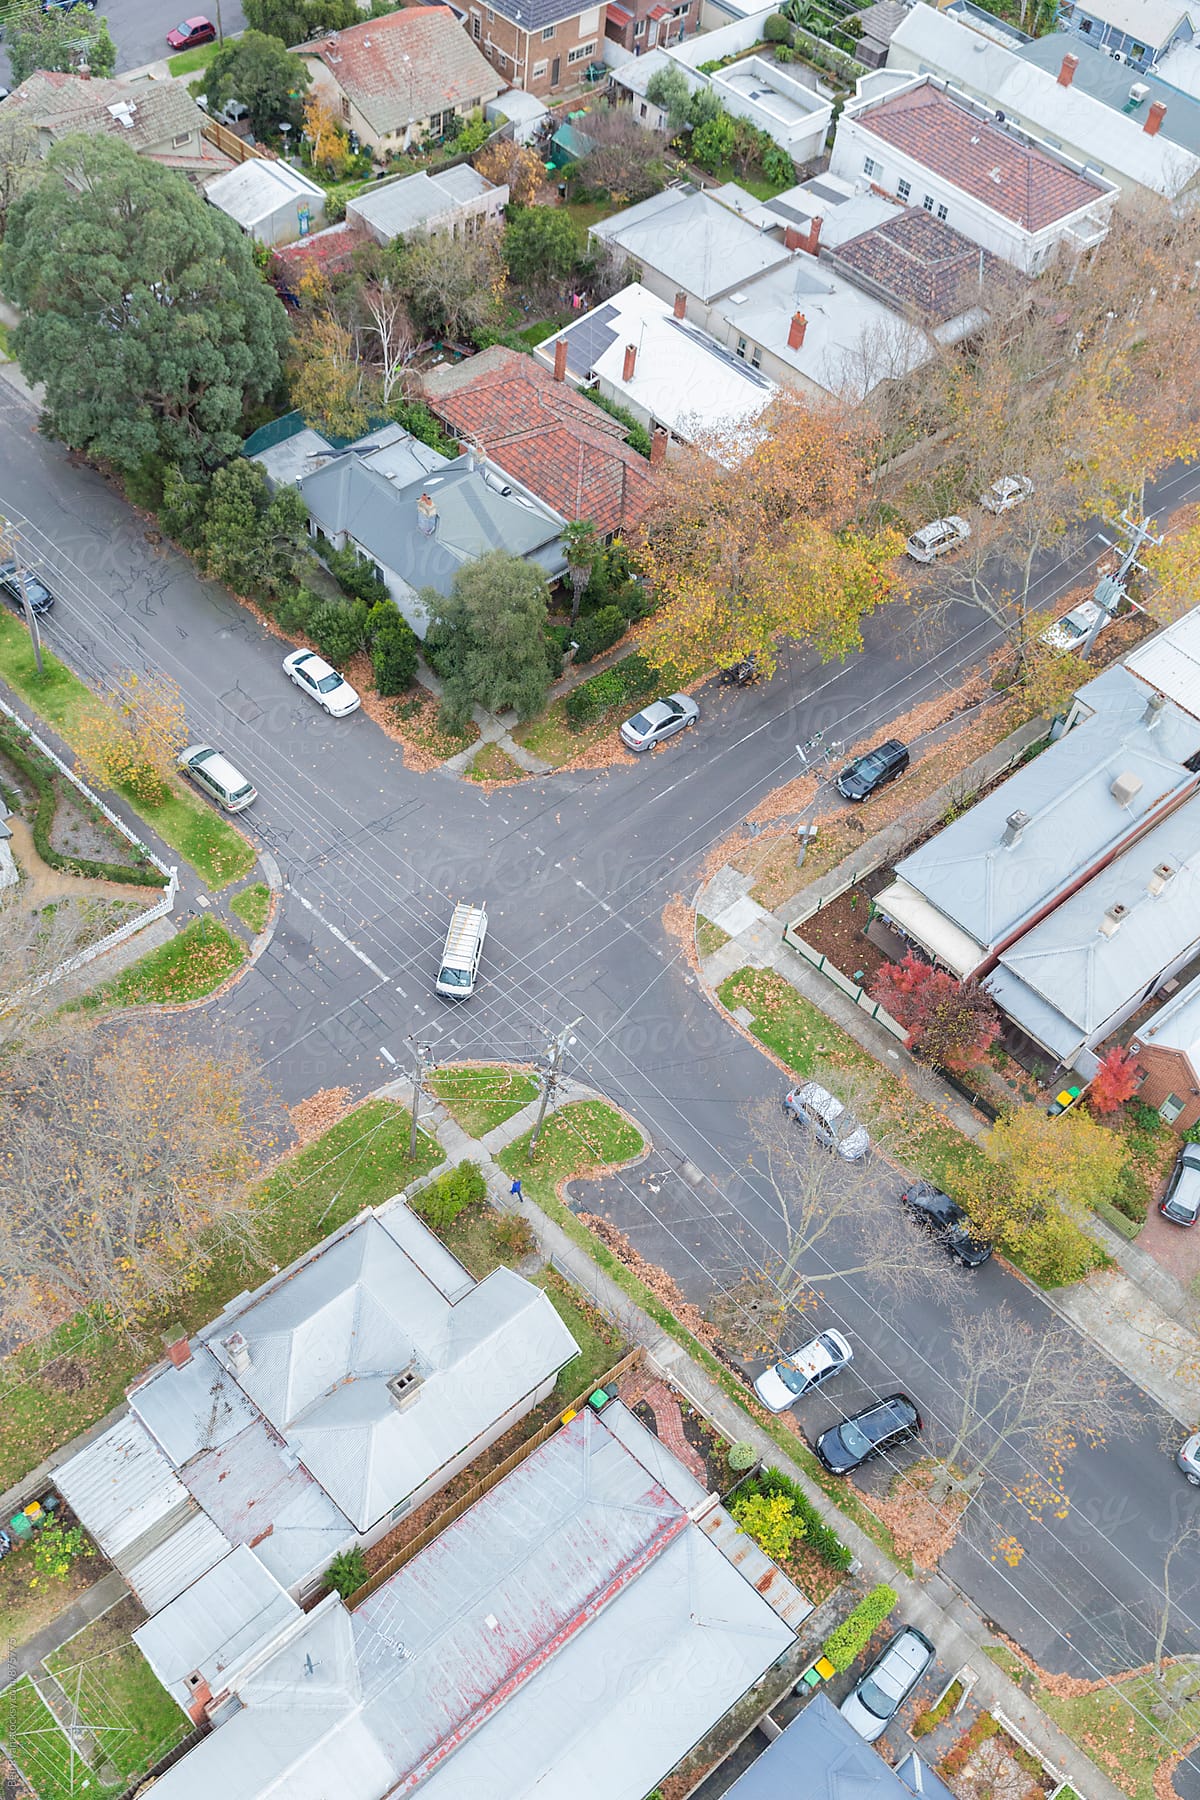 'Overhead view of suburban street intersection